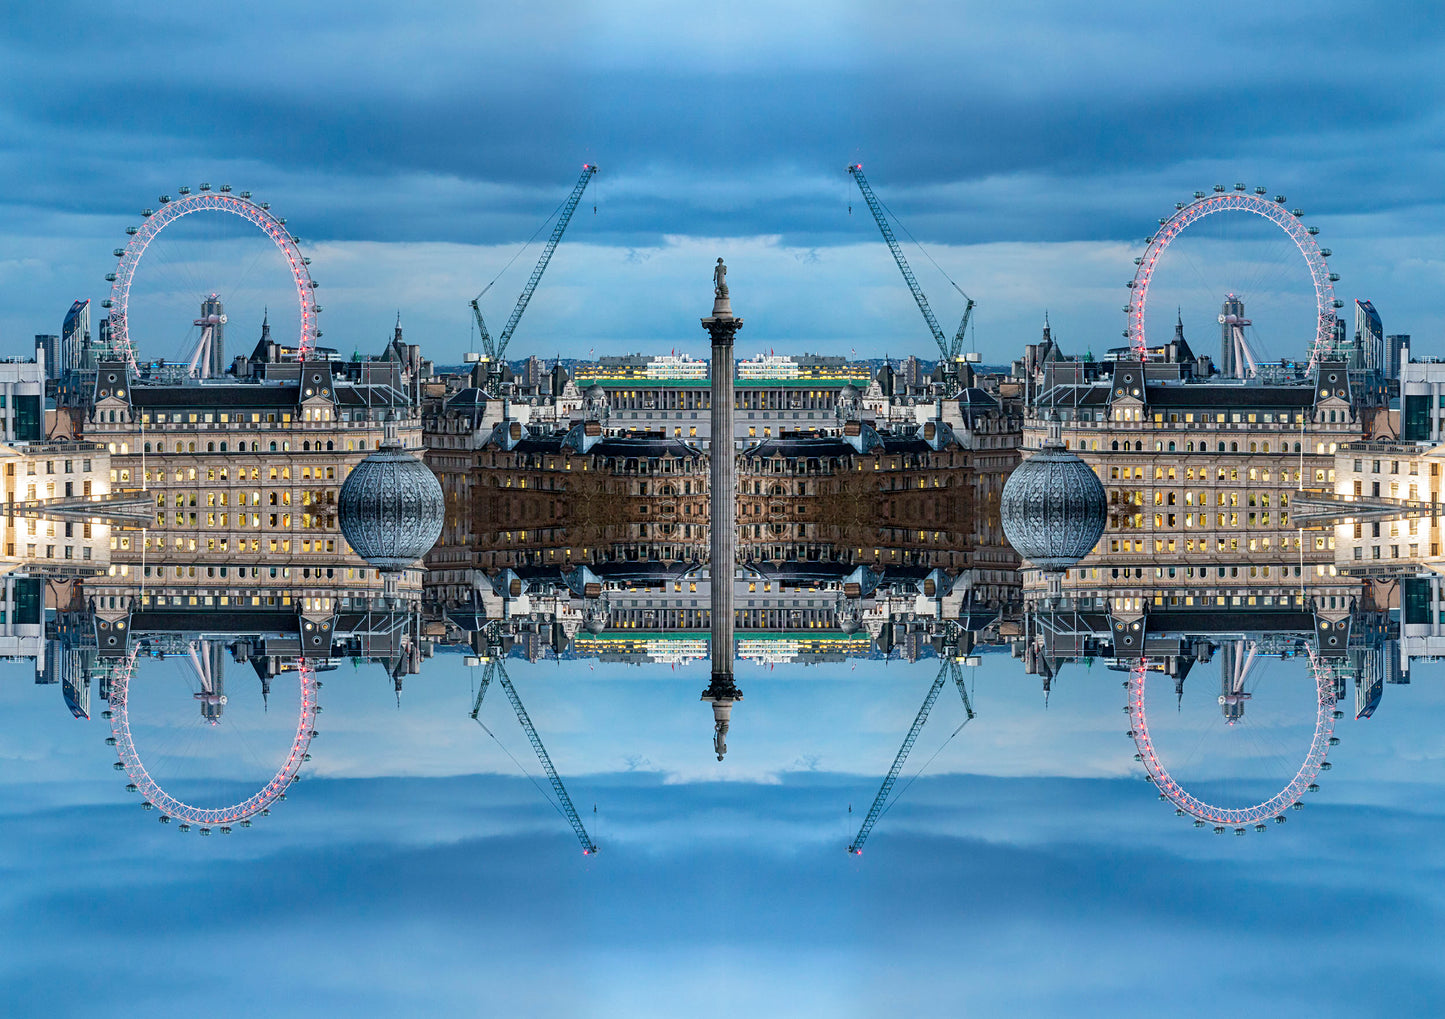 Daniel-Sambraus-Nelsons-Column-Limited-Edition-Digital-Photography-TAP-Galleries, Essex Gallery